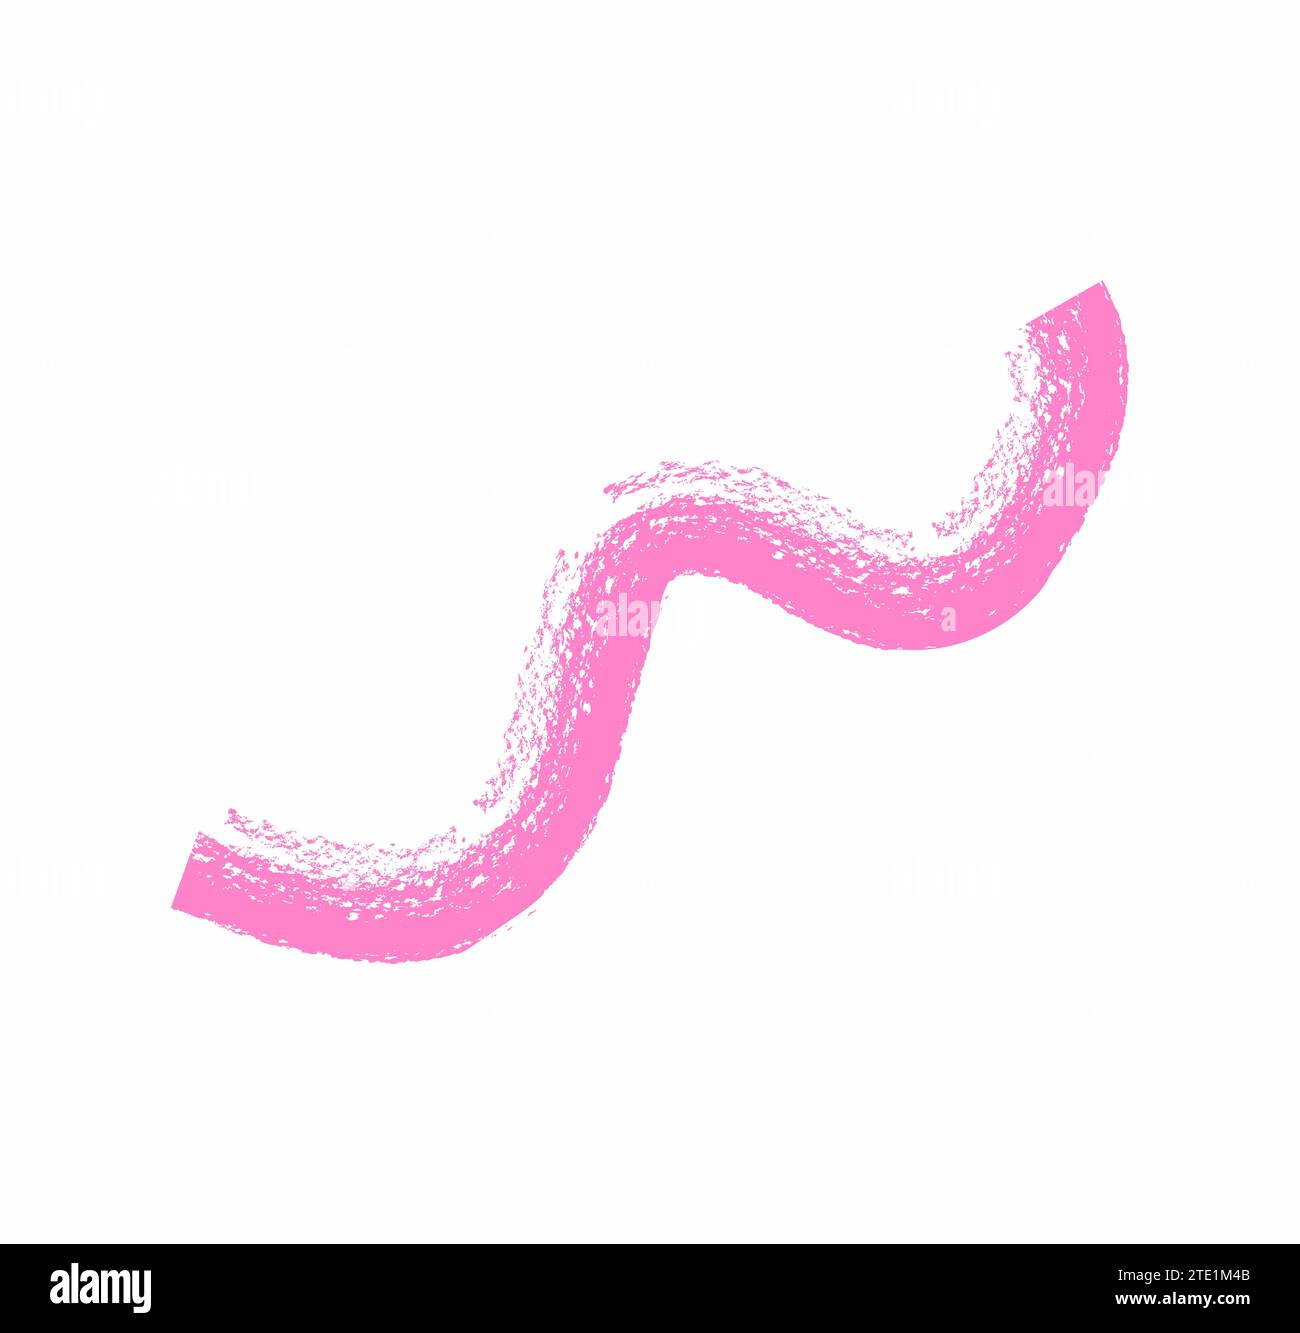 paint brush stroke. Hand drawn grunge squiggle element. white, pink icon in flat style of curved and wavy lines. Chaotic ink brush scribble for decor. Stock Vector